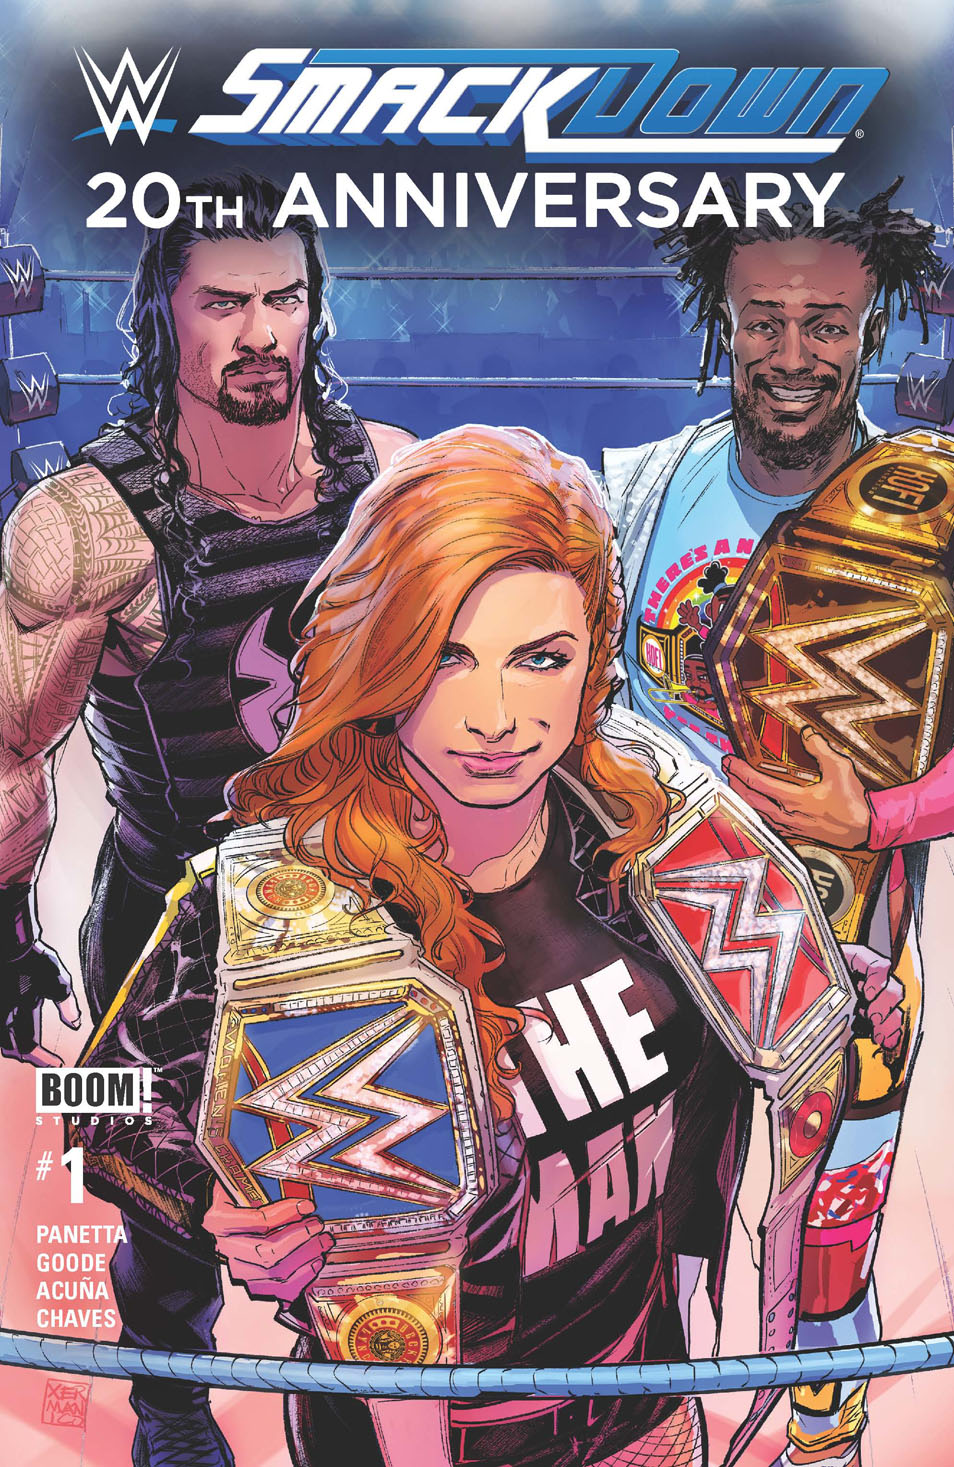 This image is the cover for the book WWE Smackdown #1, WWE